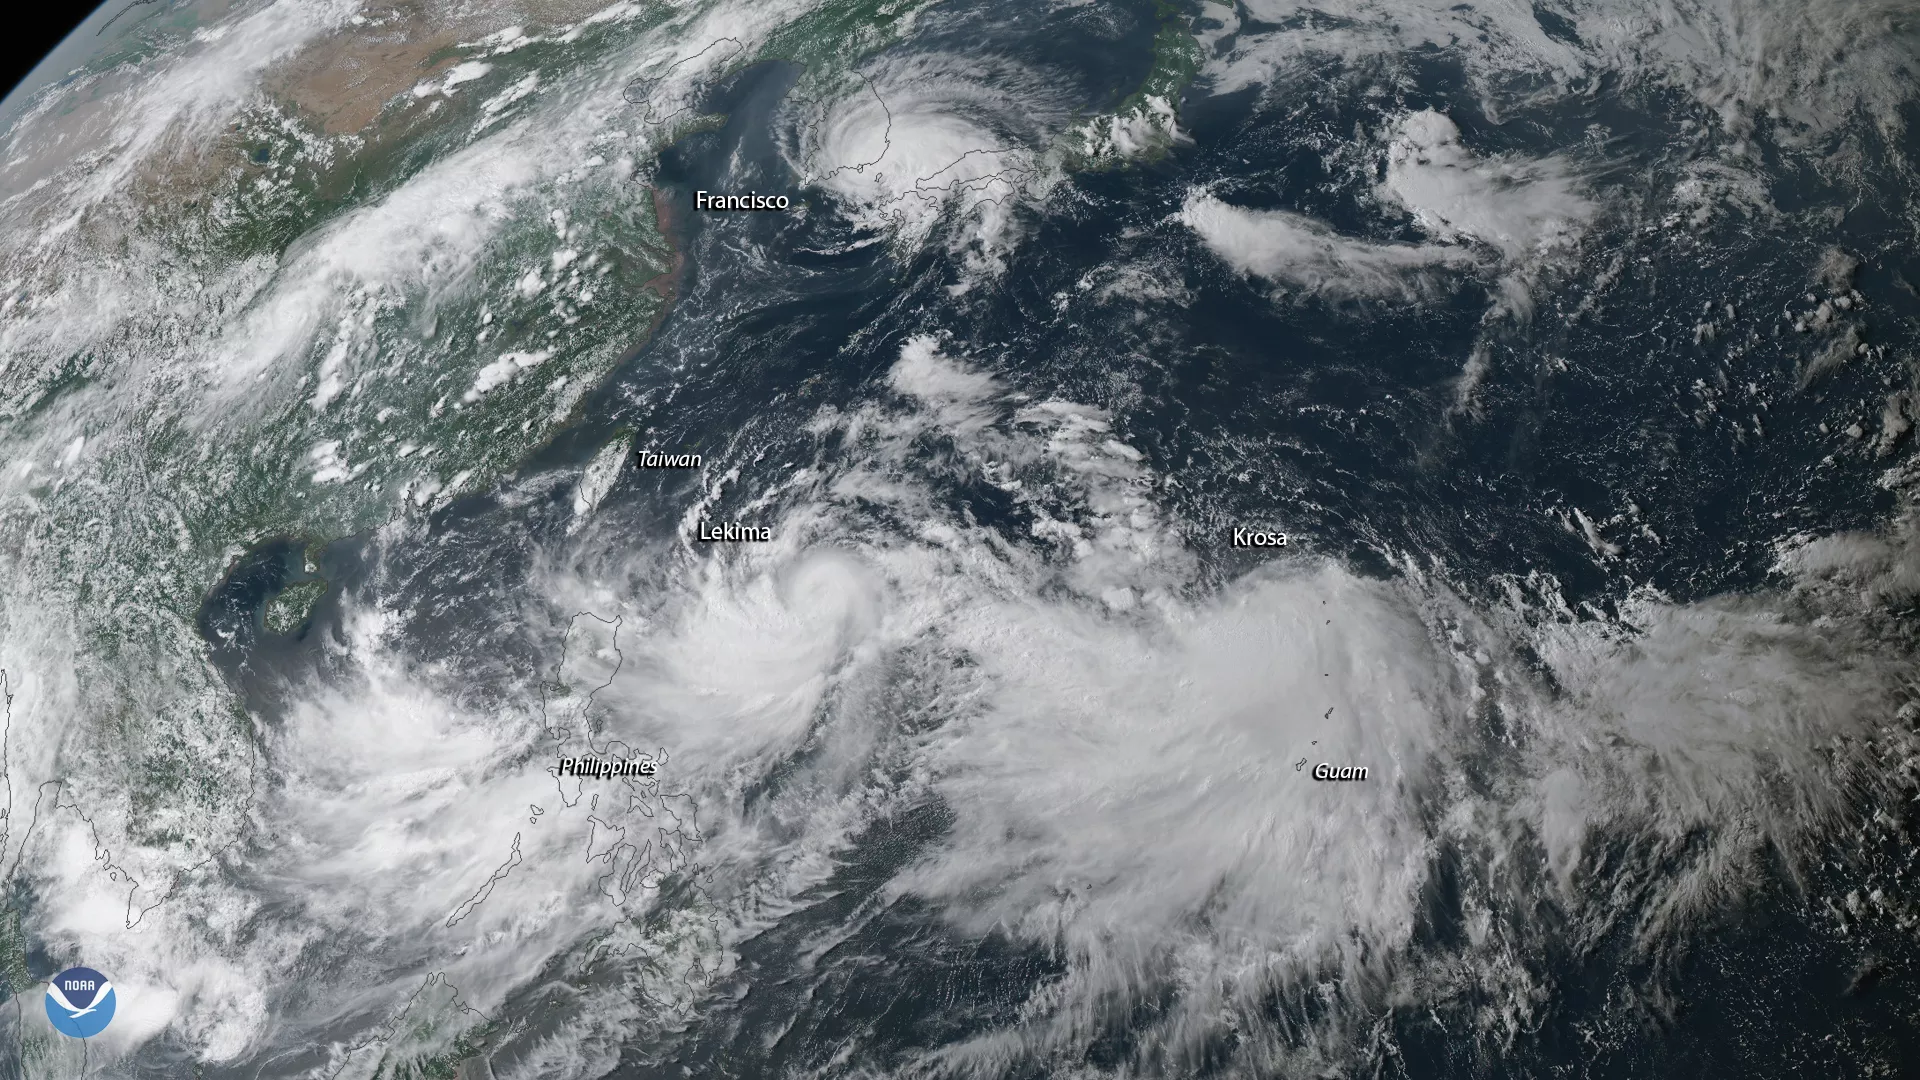 GeoColor imagery of a triangle of tropical storm systems (Lekima, Francisco, and Krosa) in the Western Pacific Ocean (Guam, Phillipines) via the Himawari-8 satellite August 6, 2019, 